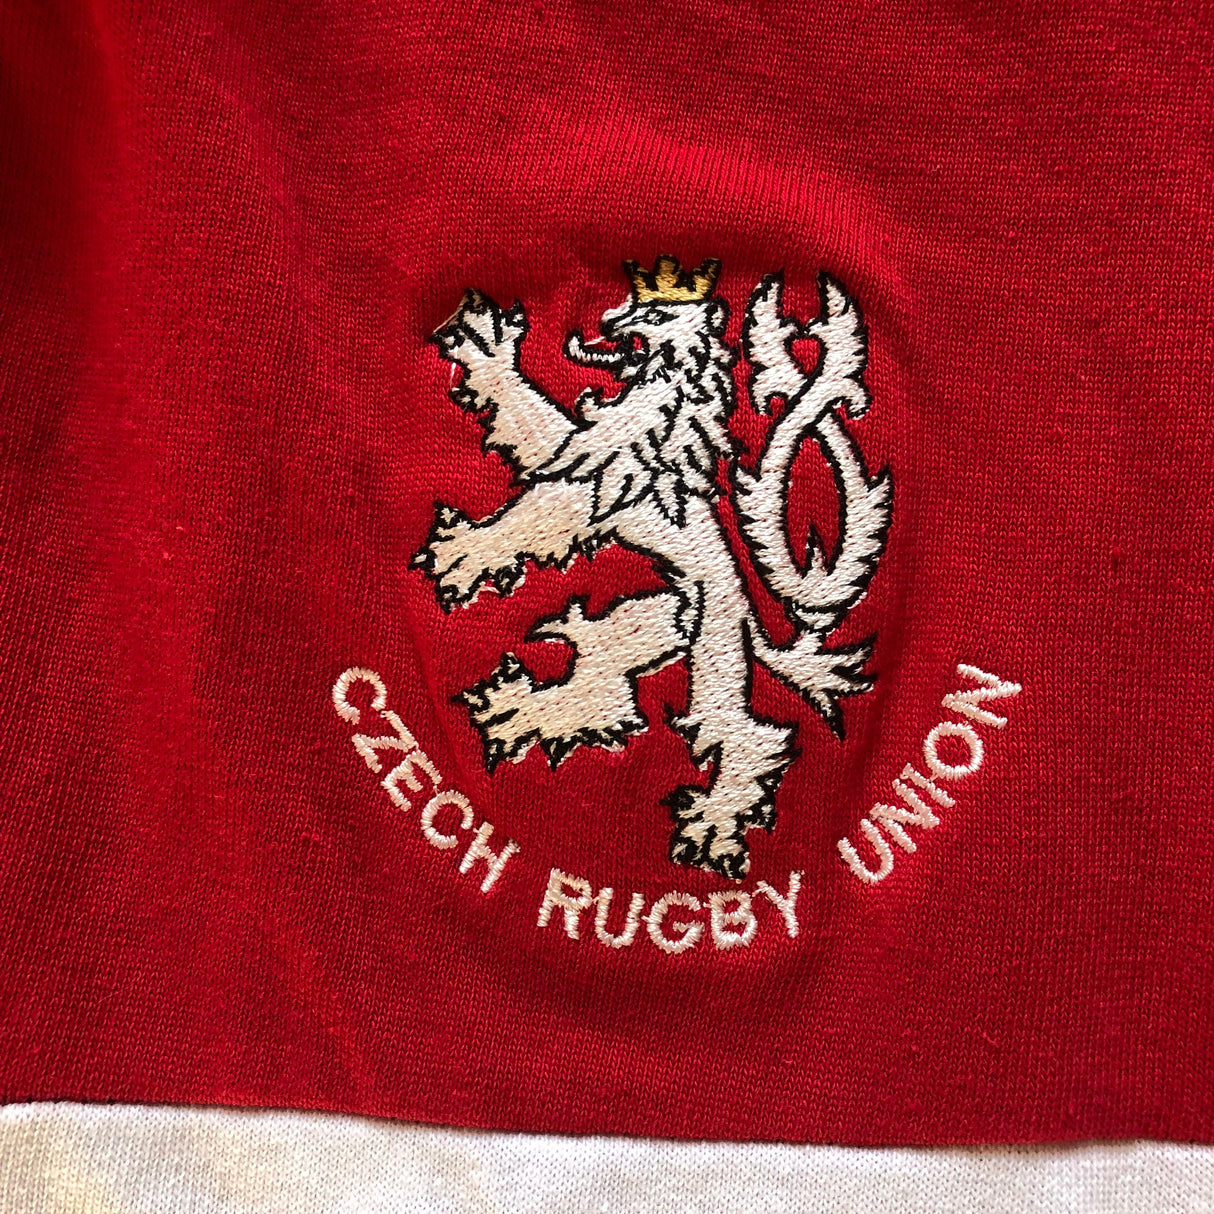 Czech Republic National Rugby Team Jersey 1990's 3XL Underdog Rugby - The Tier 2 Rugby Shop 